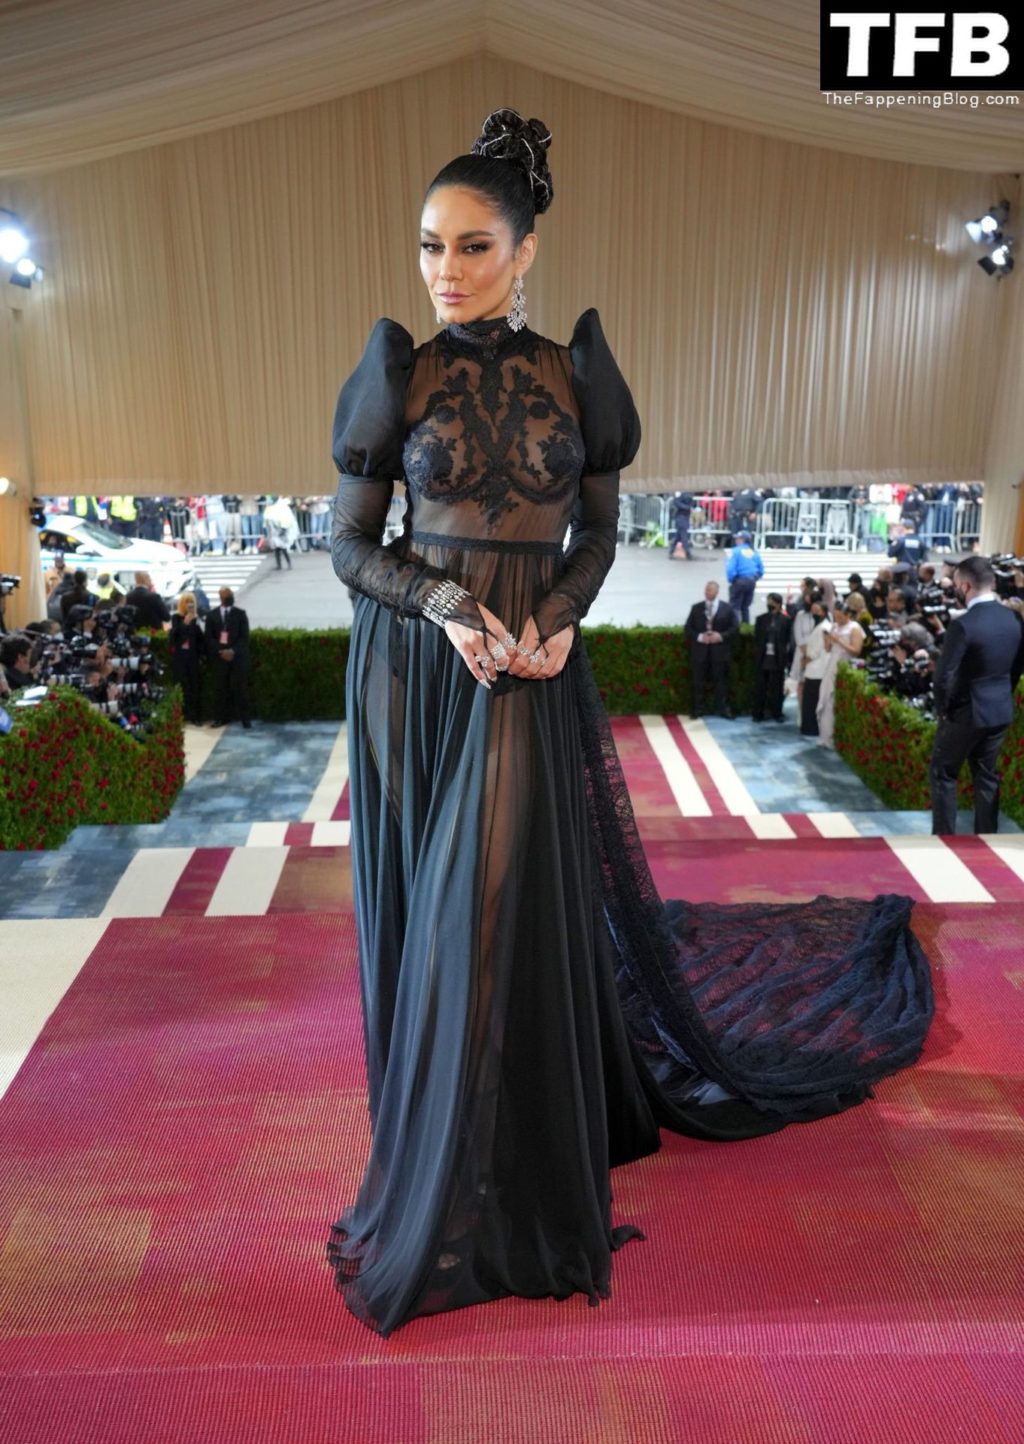 Vanessa Hudgens Sexy The Fappening Blog 24 1 1024x1444 - Vanessa Hudgens Looks Stunning in a See-Through Dress at The 2022 Met Gala in NYC (99 Photos)